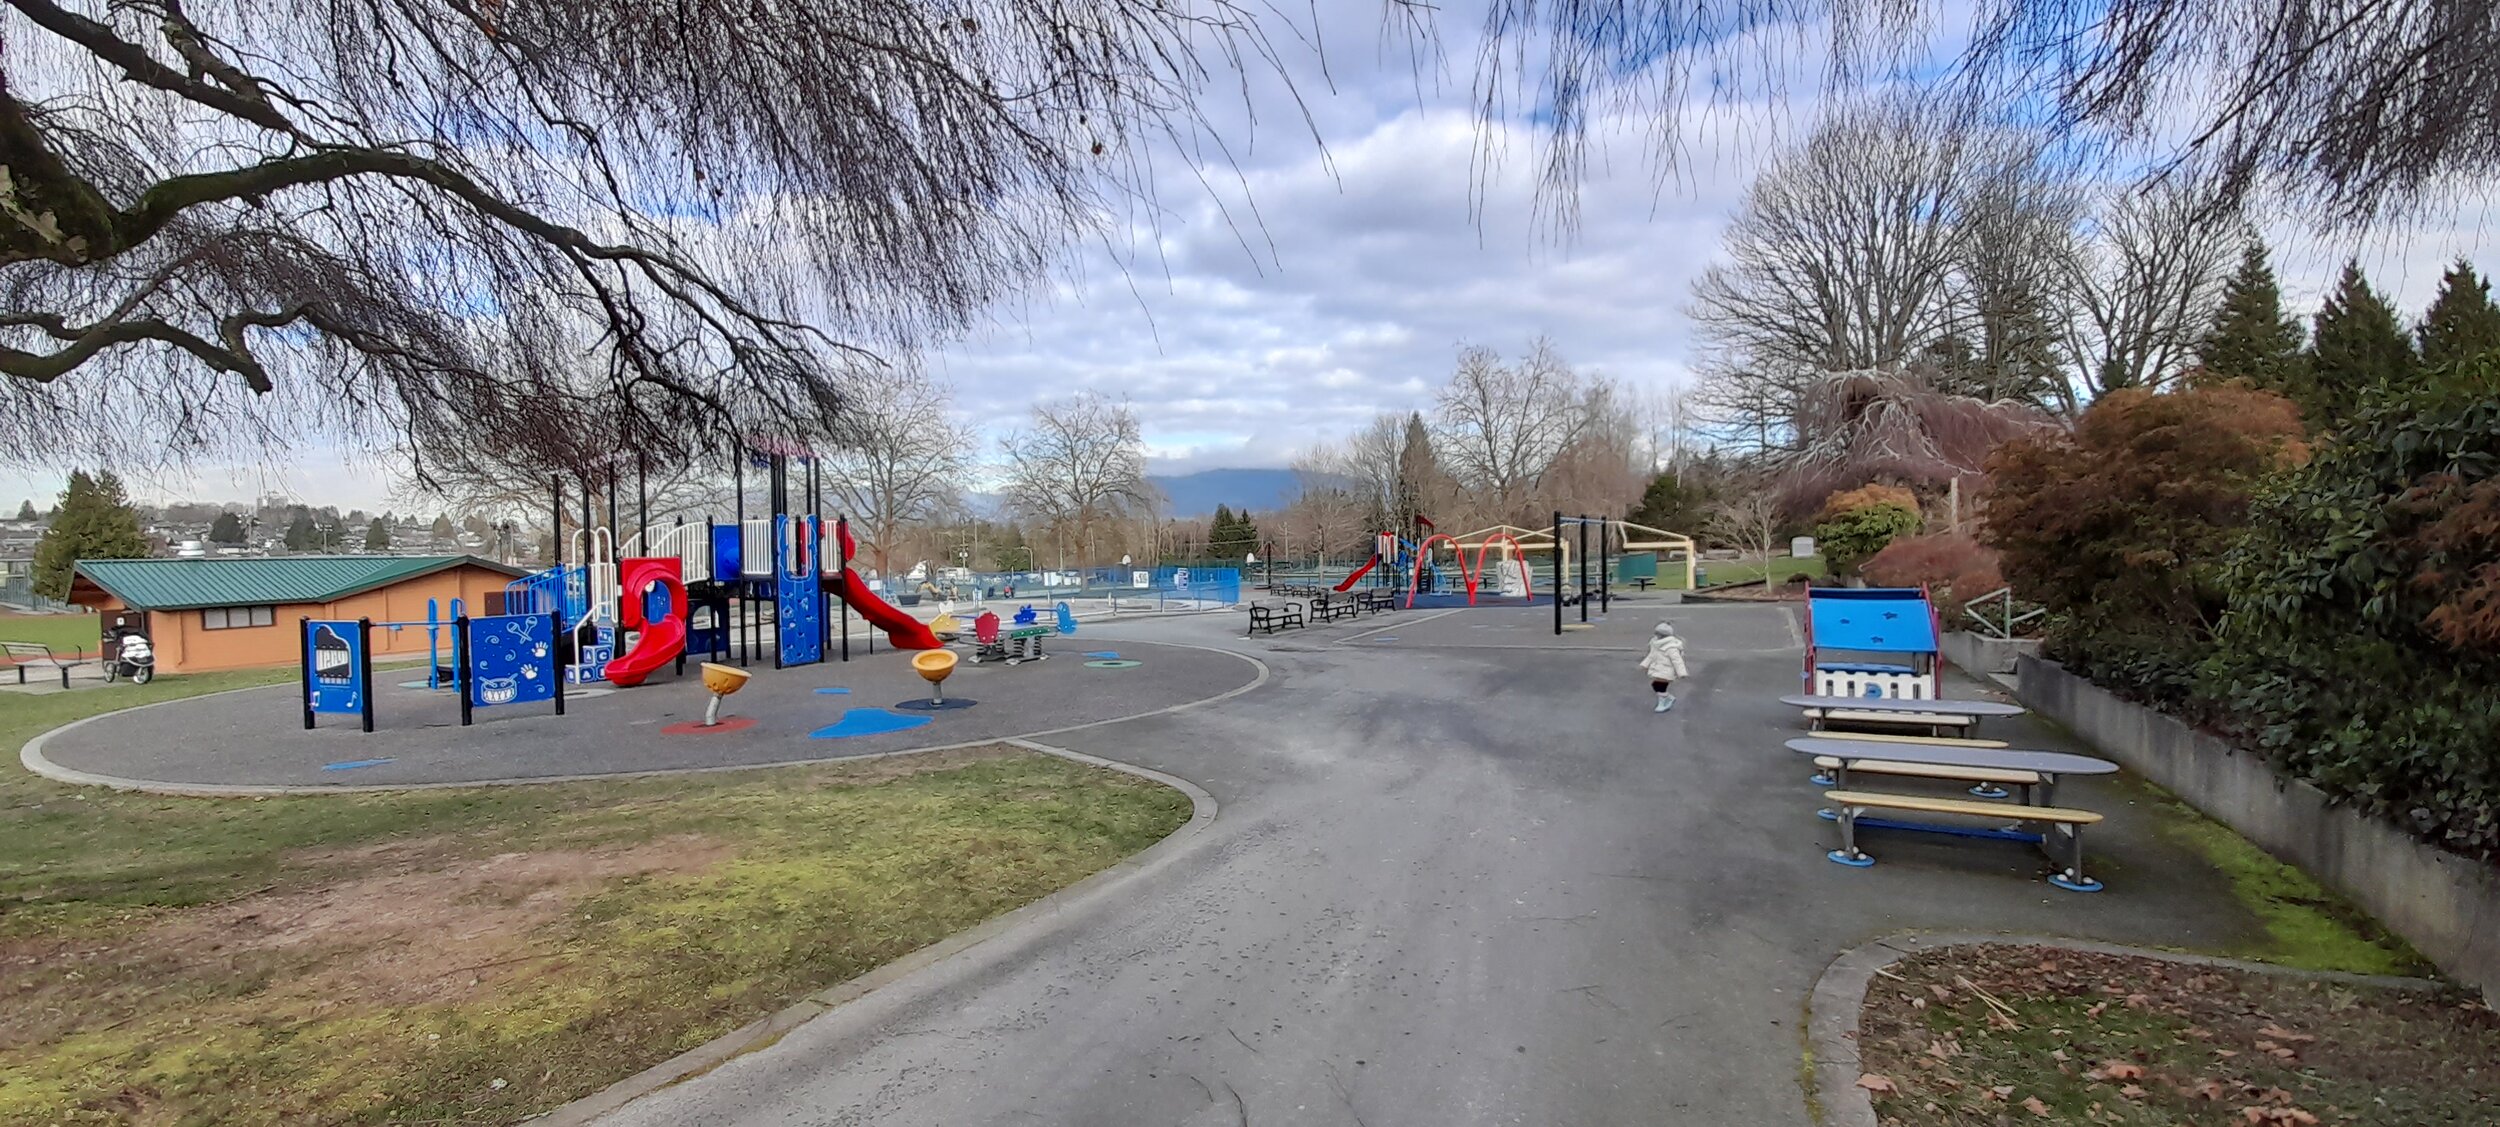 View of the playground, public washrooms, and trees